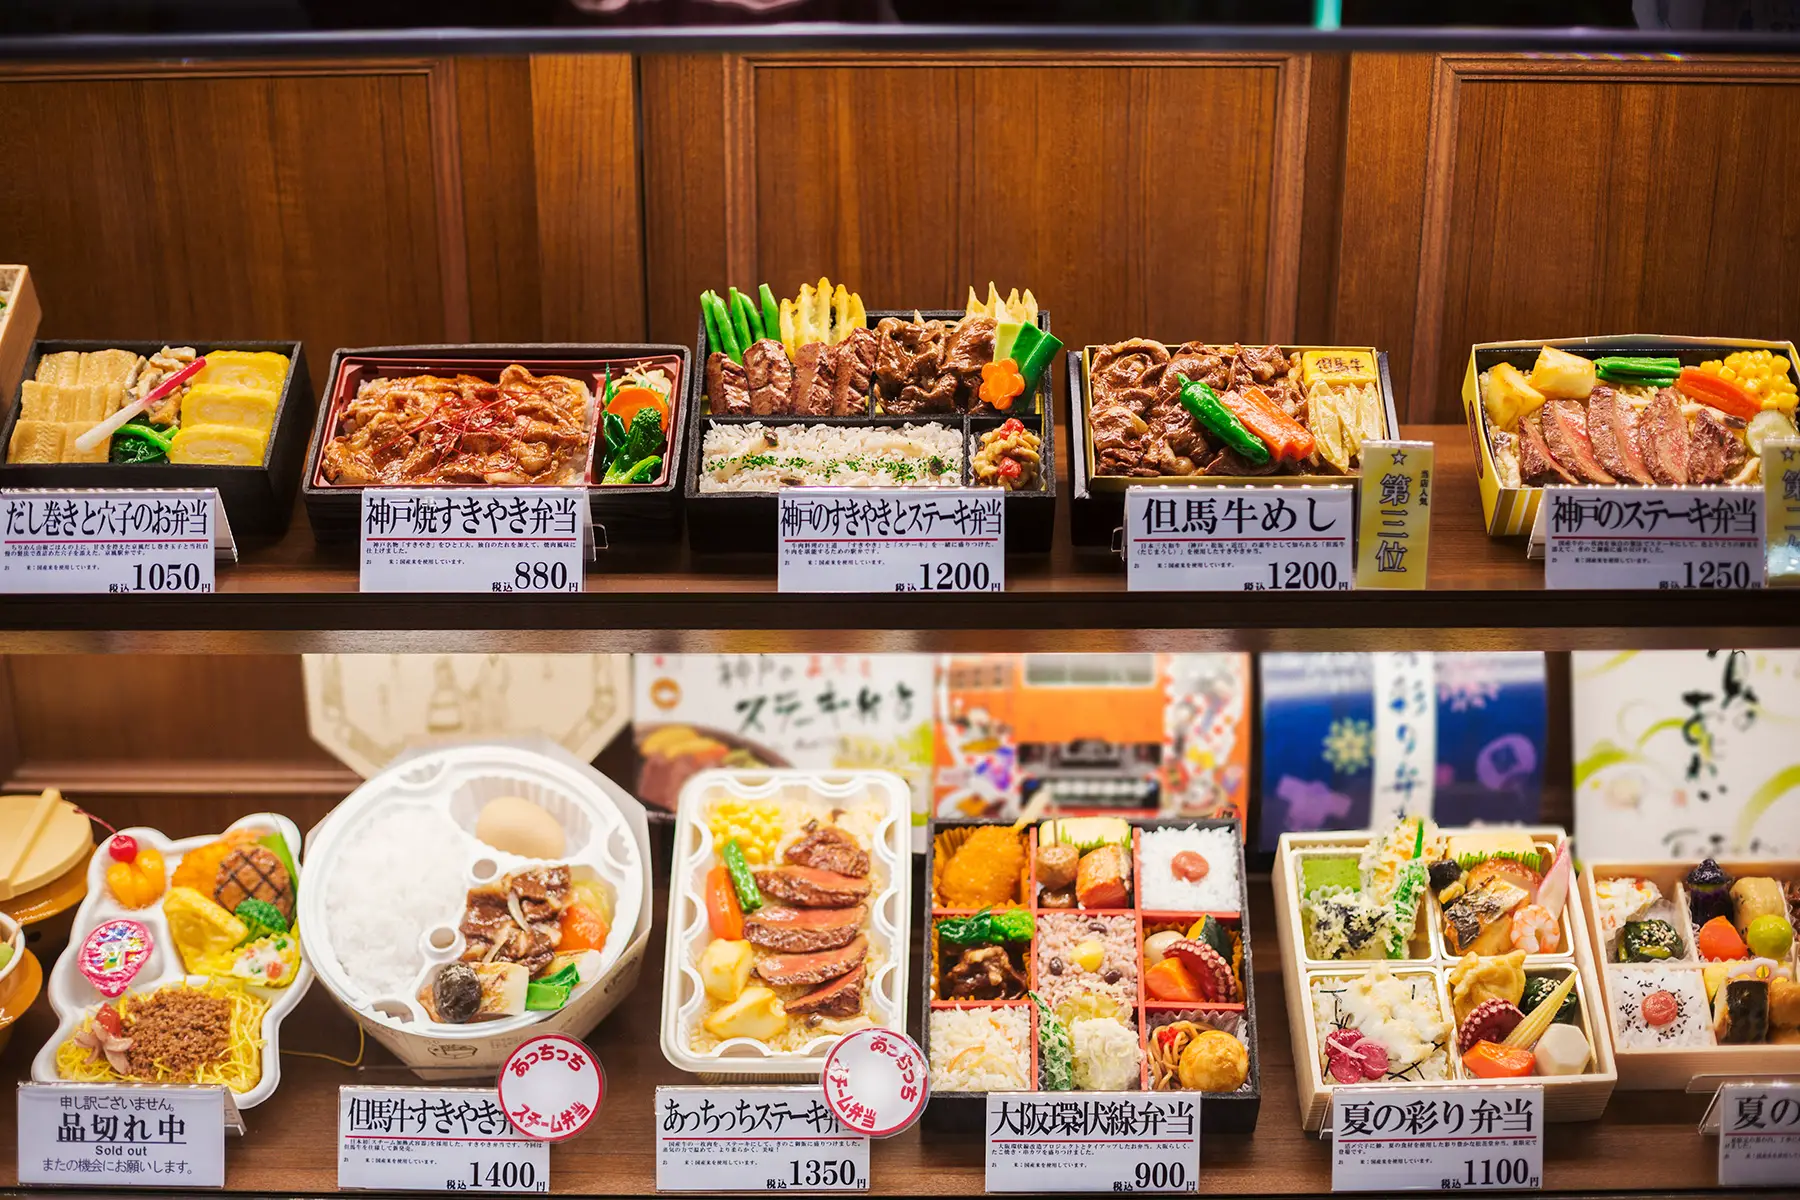 A selection of bento boxes on display in a Japanese restaurant